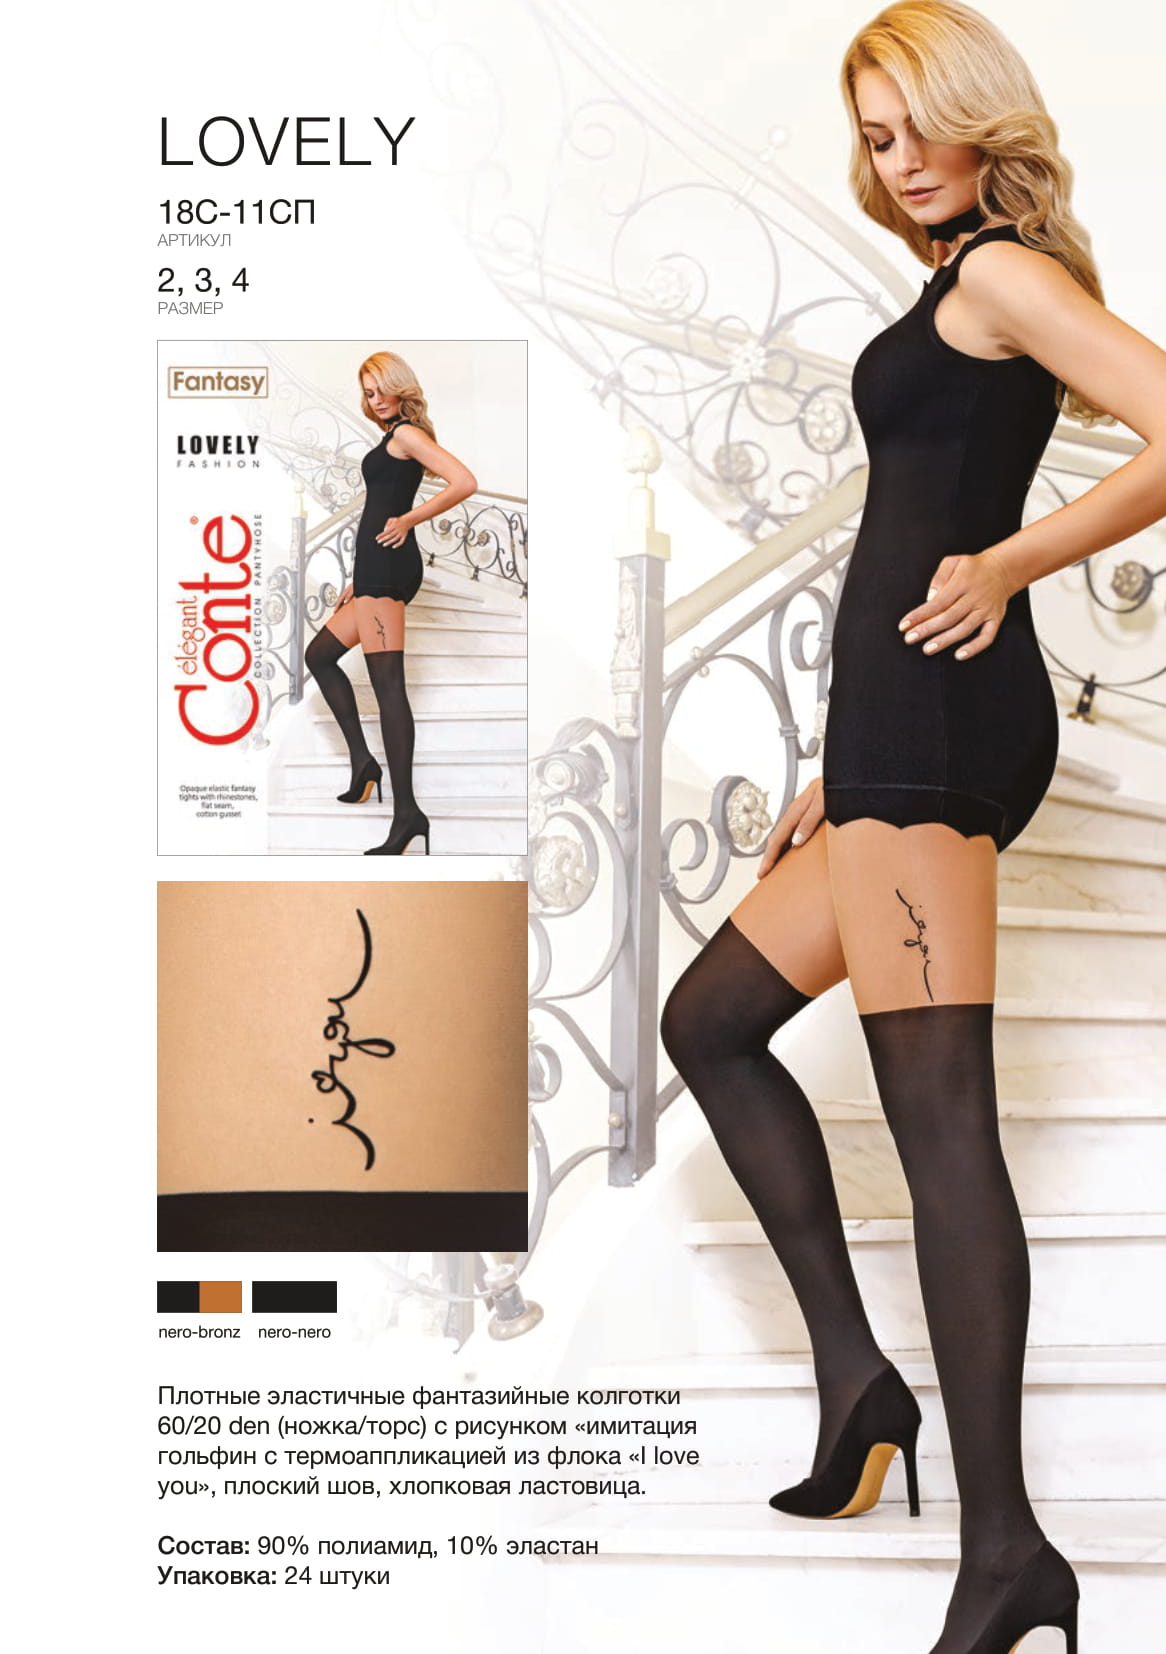 Conte Lovely 60 Den - Fantasy Opaque Women's Tights stockings imitation with a tattoo design (18С-11СП)